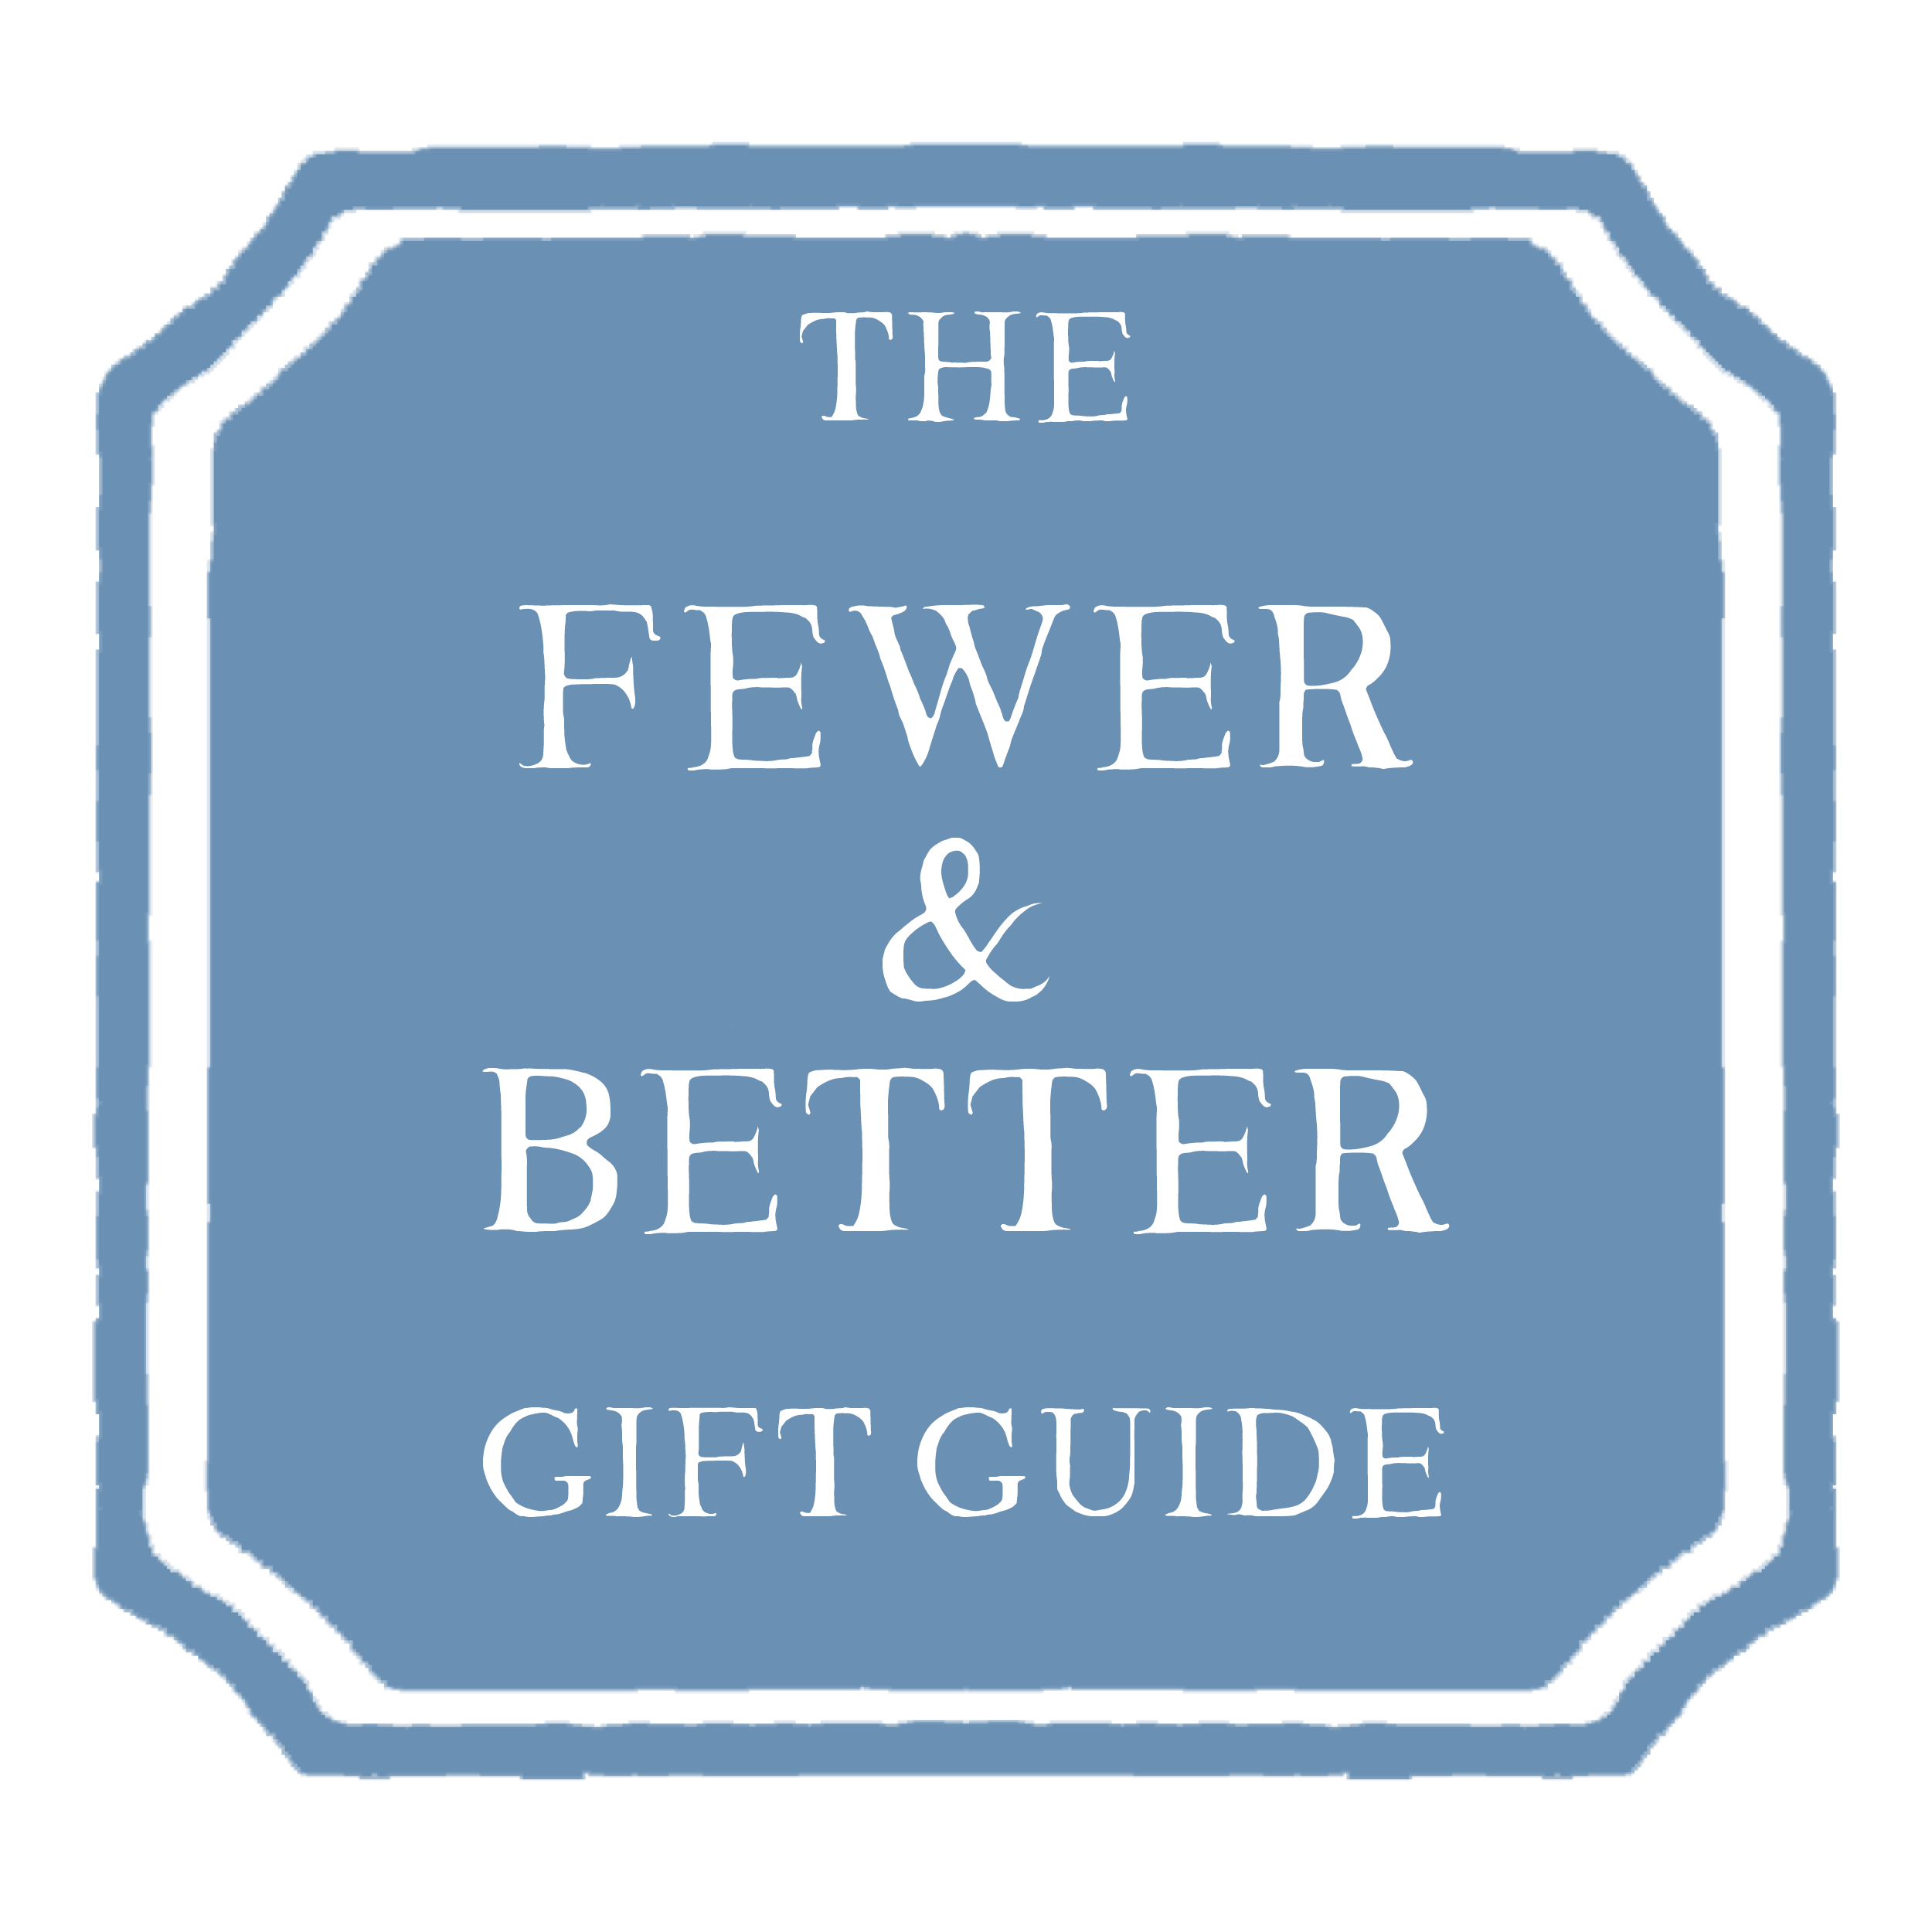 The 2023 Fewer & Better Gift Guide